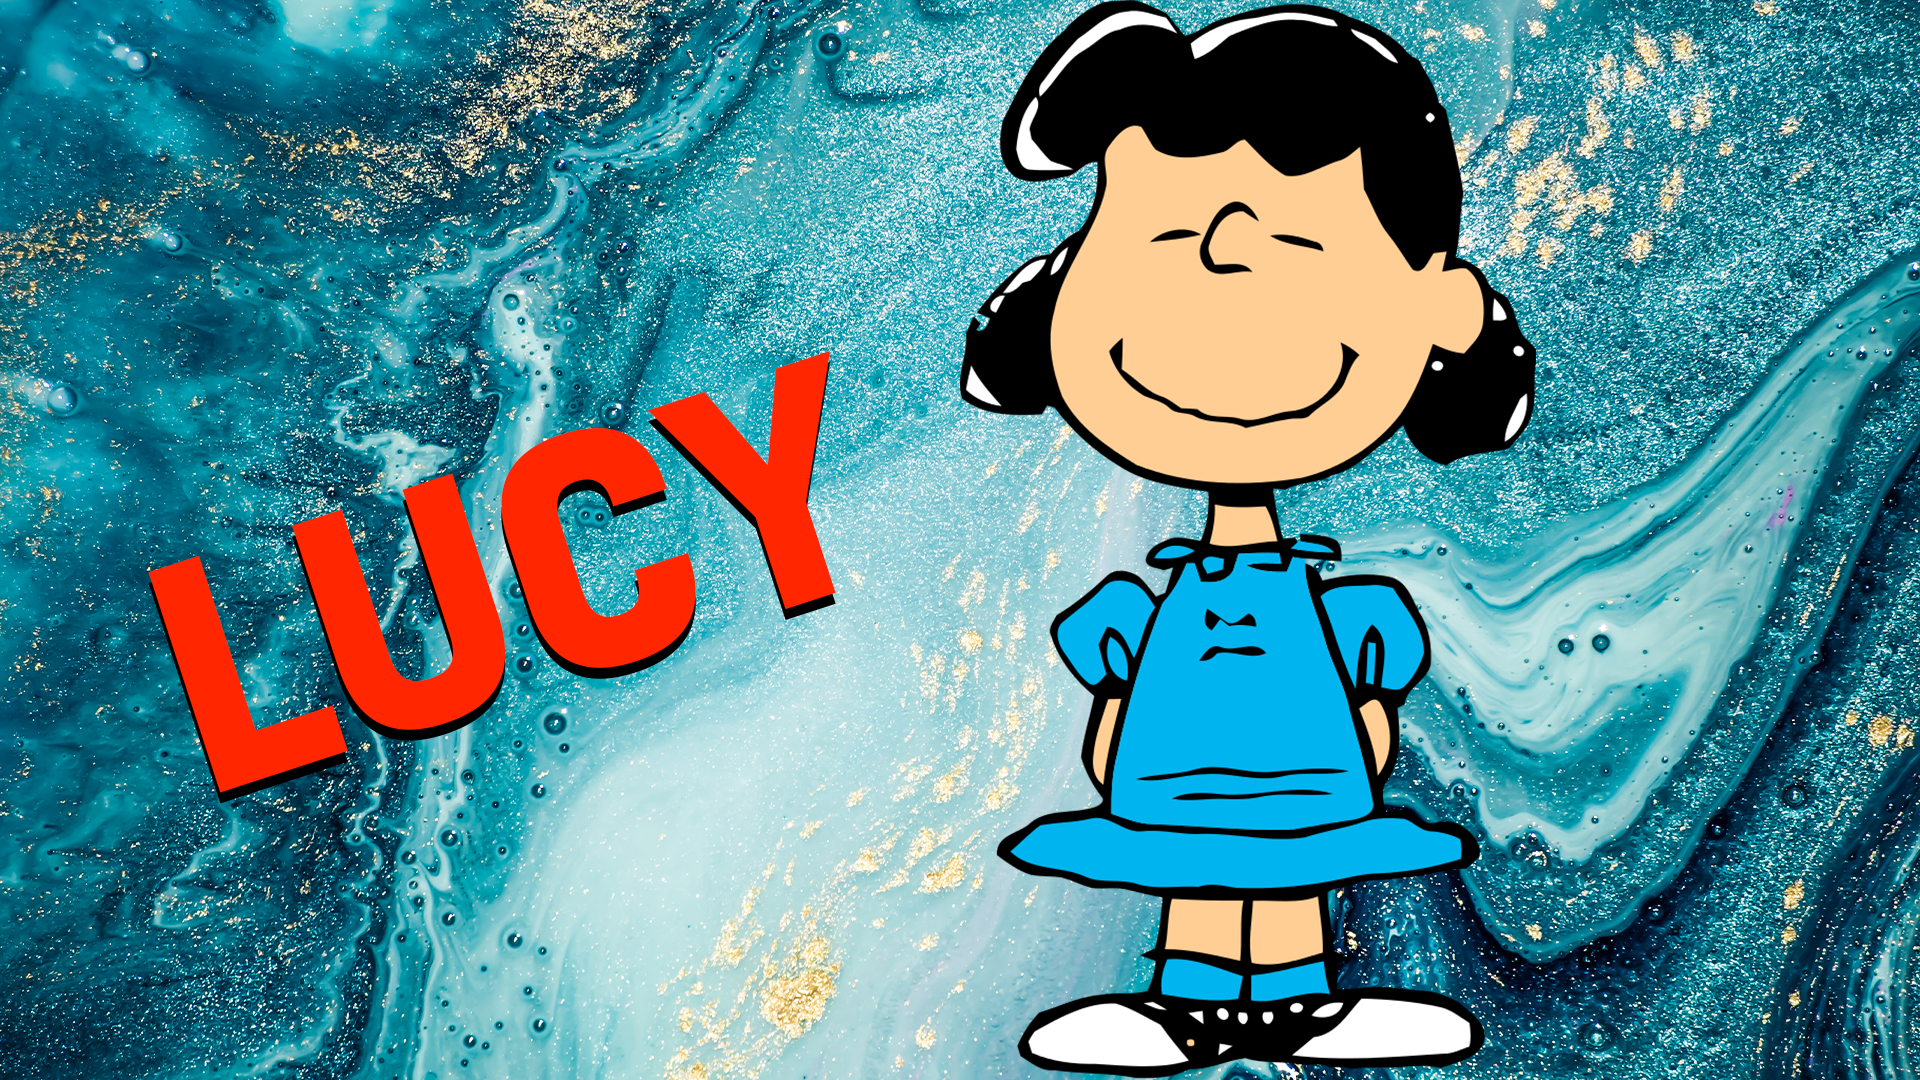 Lucy from Peanuts